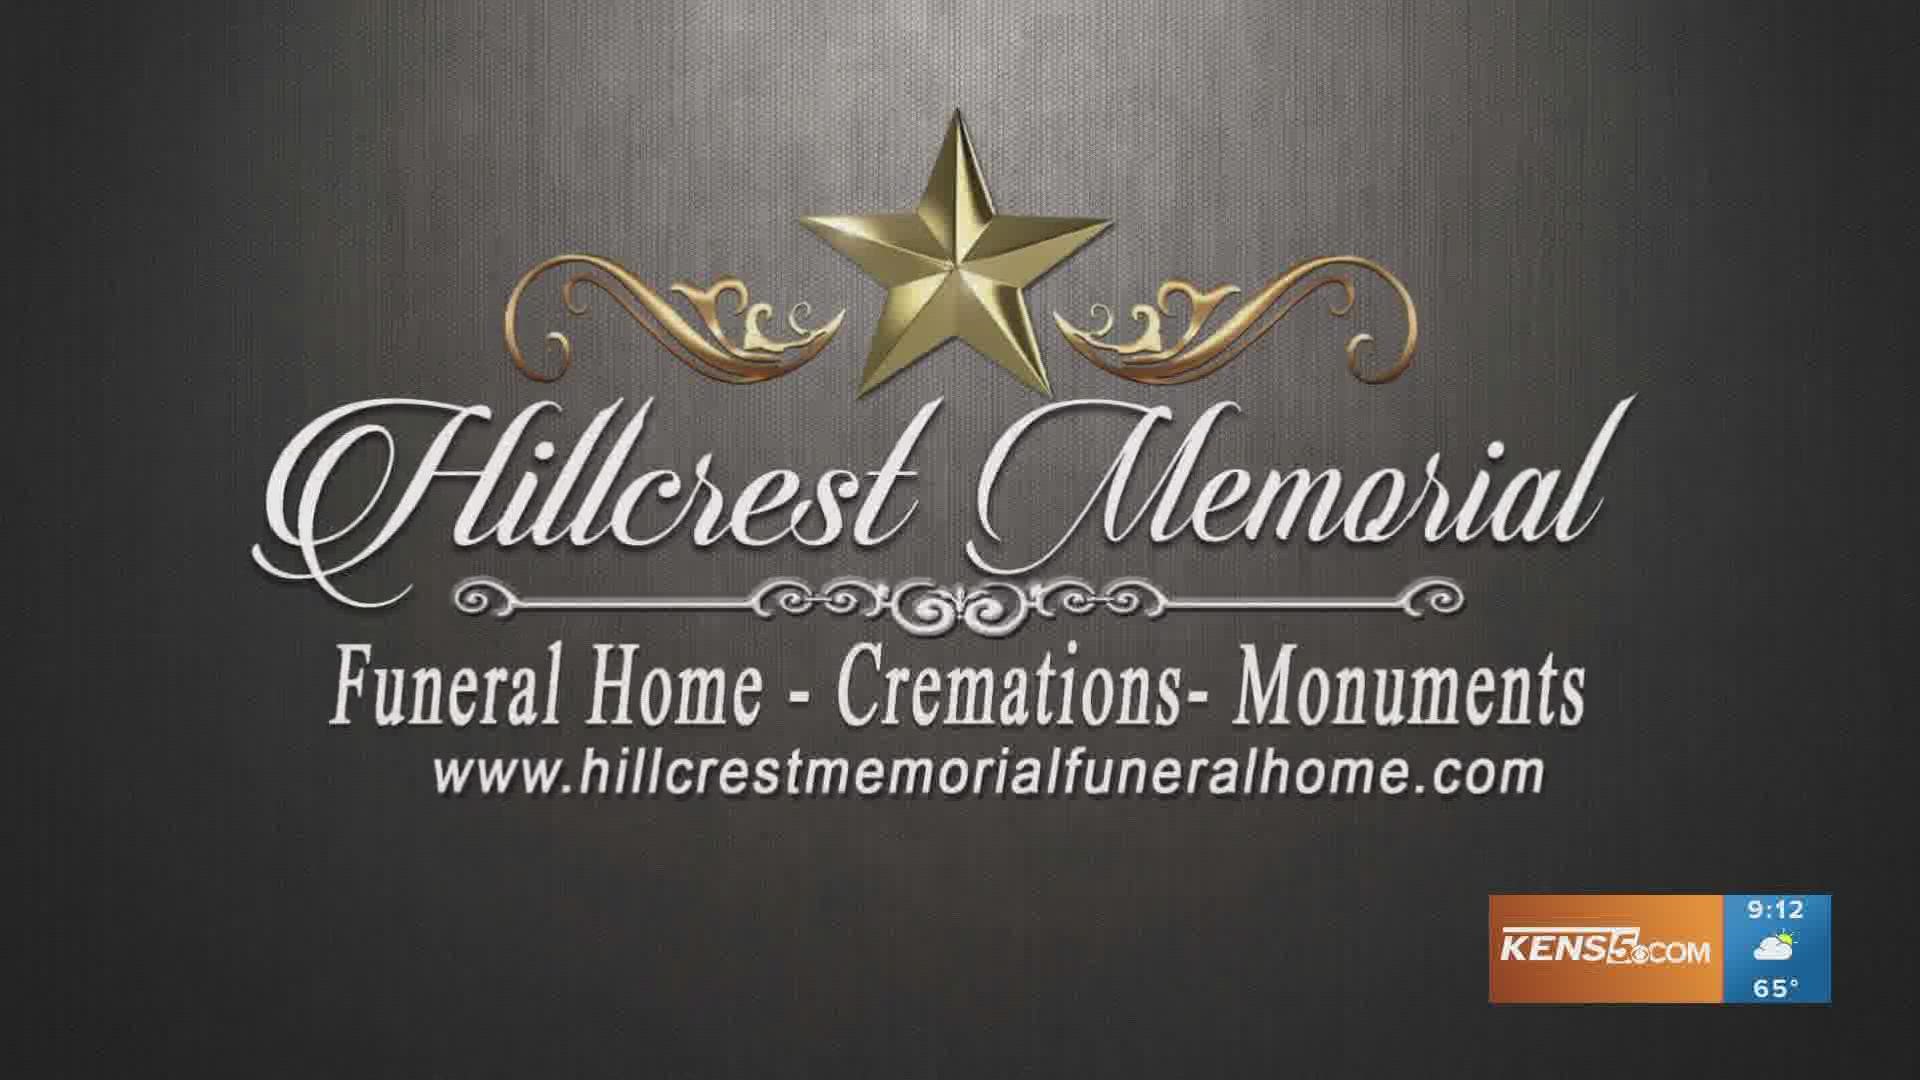 The funeral home is trying to make this time easier on families by offering them free services.